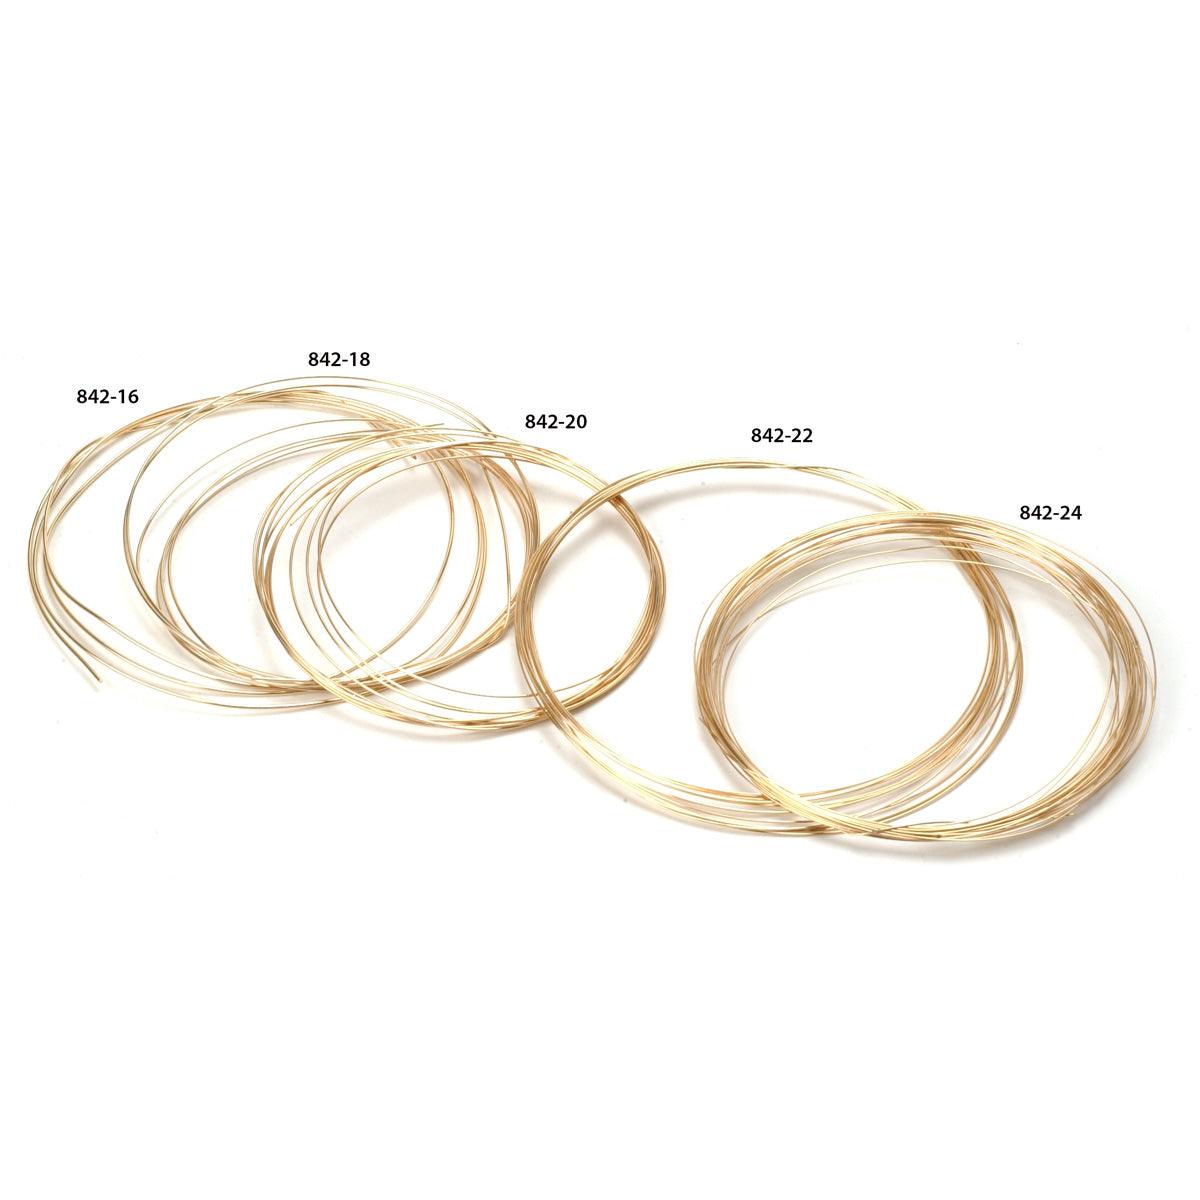 28 Gauge Round Gold Tone Brass Craft Wire - 120 ft: Jewelry Making Supplies, Instructions